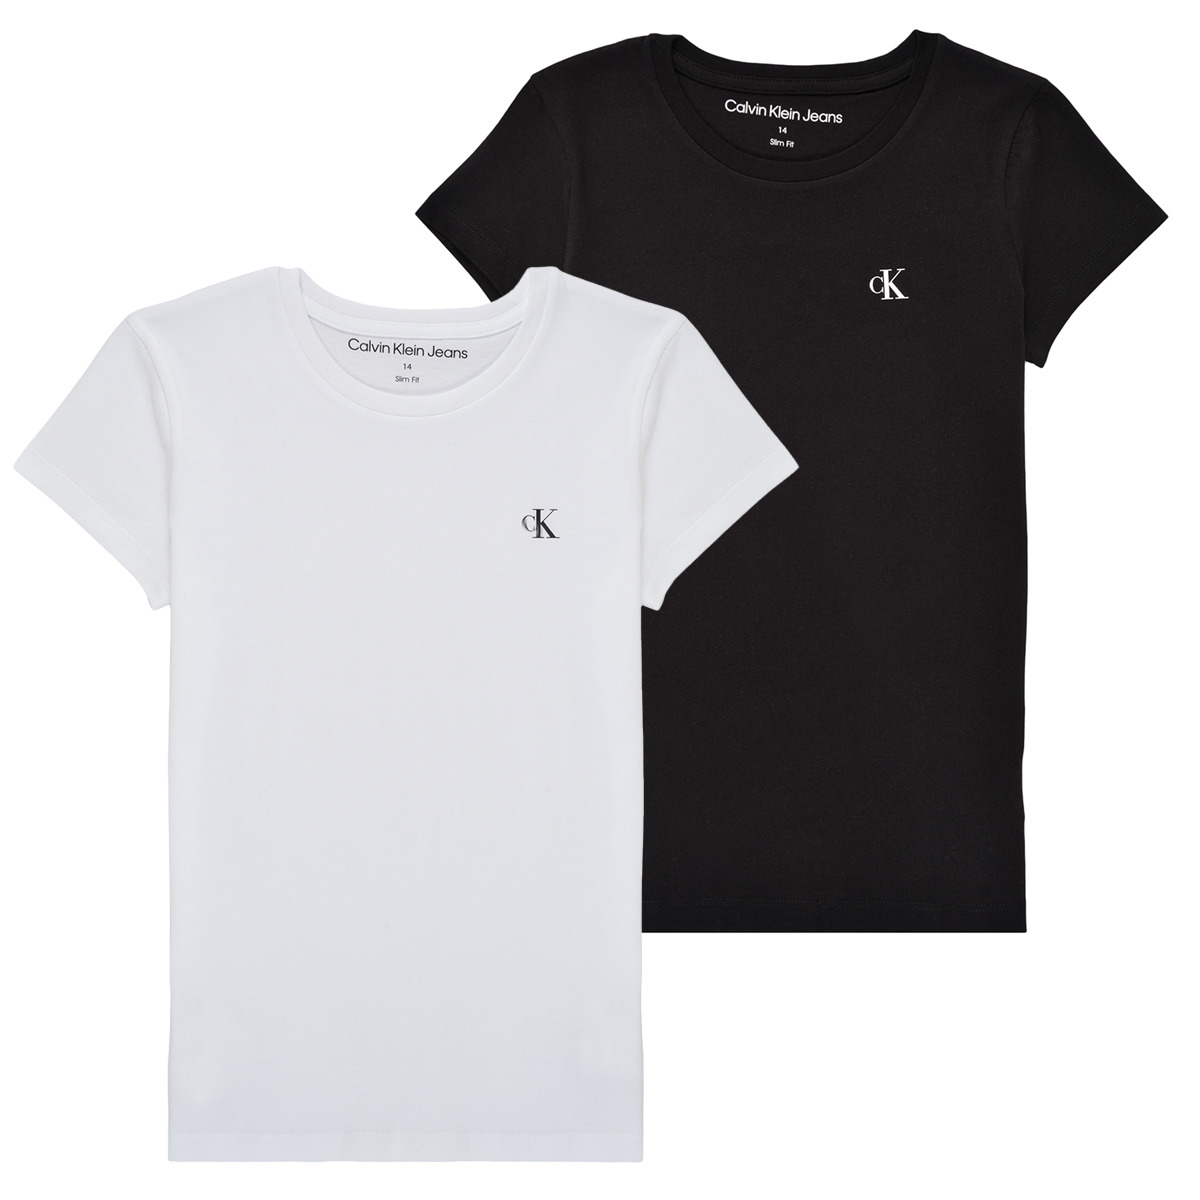 Calvin Klein Jeans 2-PACK SLIM Multicolour Spartoo Clothing - Child ! short-sleeved Free | t-shirts - delivery NET TOP MONOGRAM